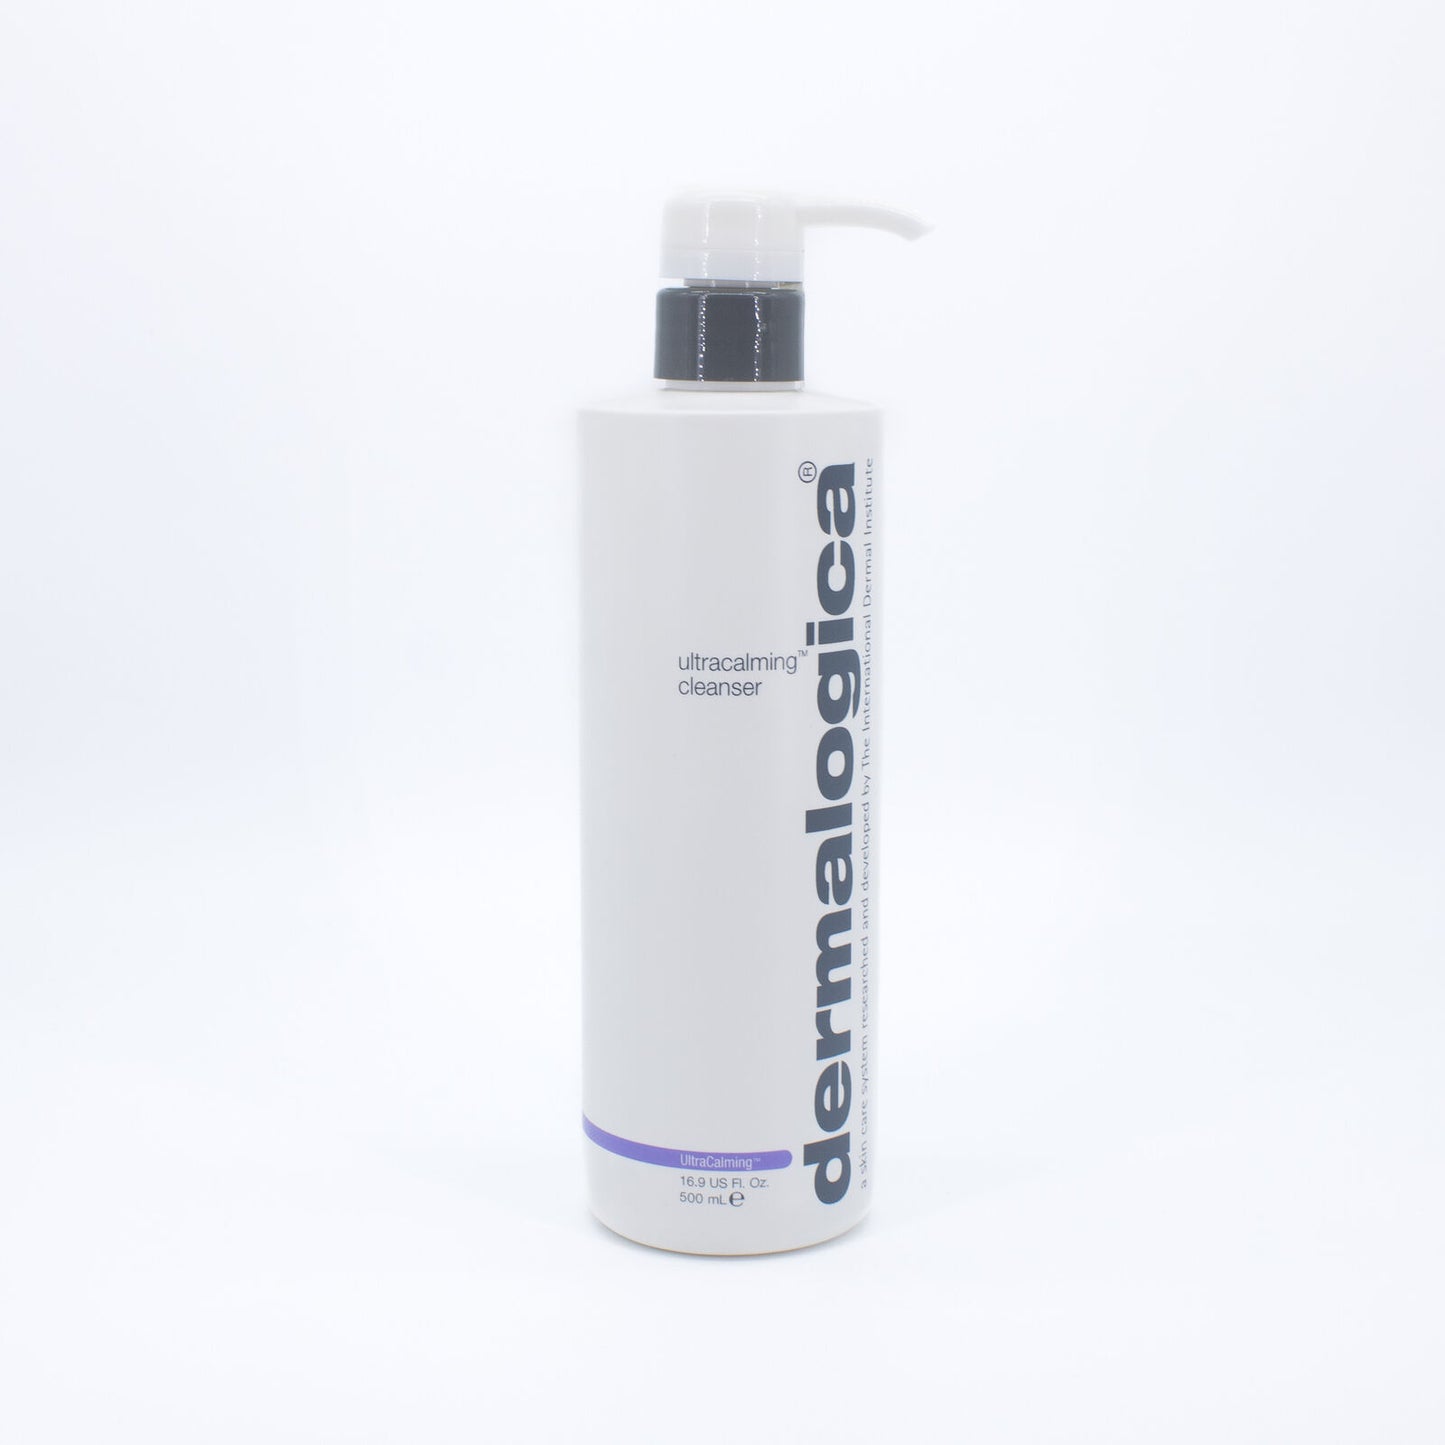 dermalogica UltraCalming Cleanser 16.9oz - Small Amount Missing